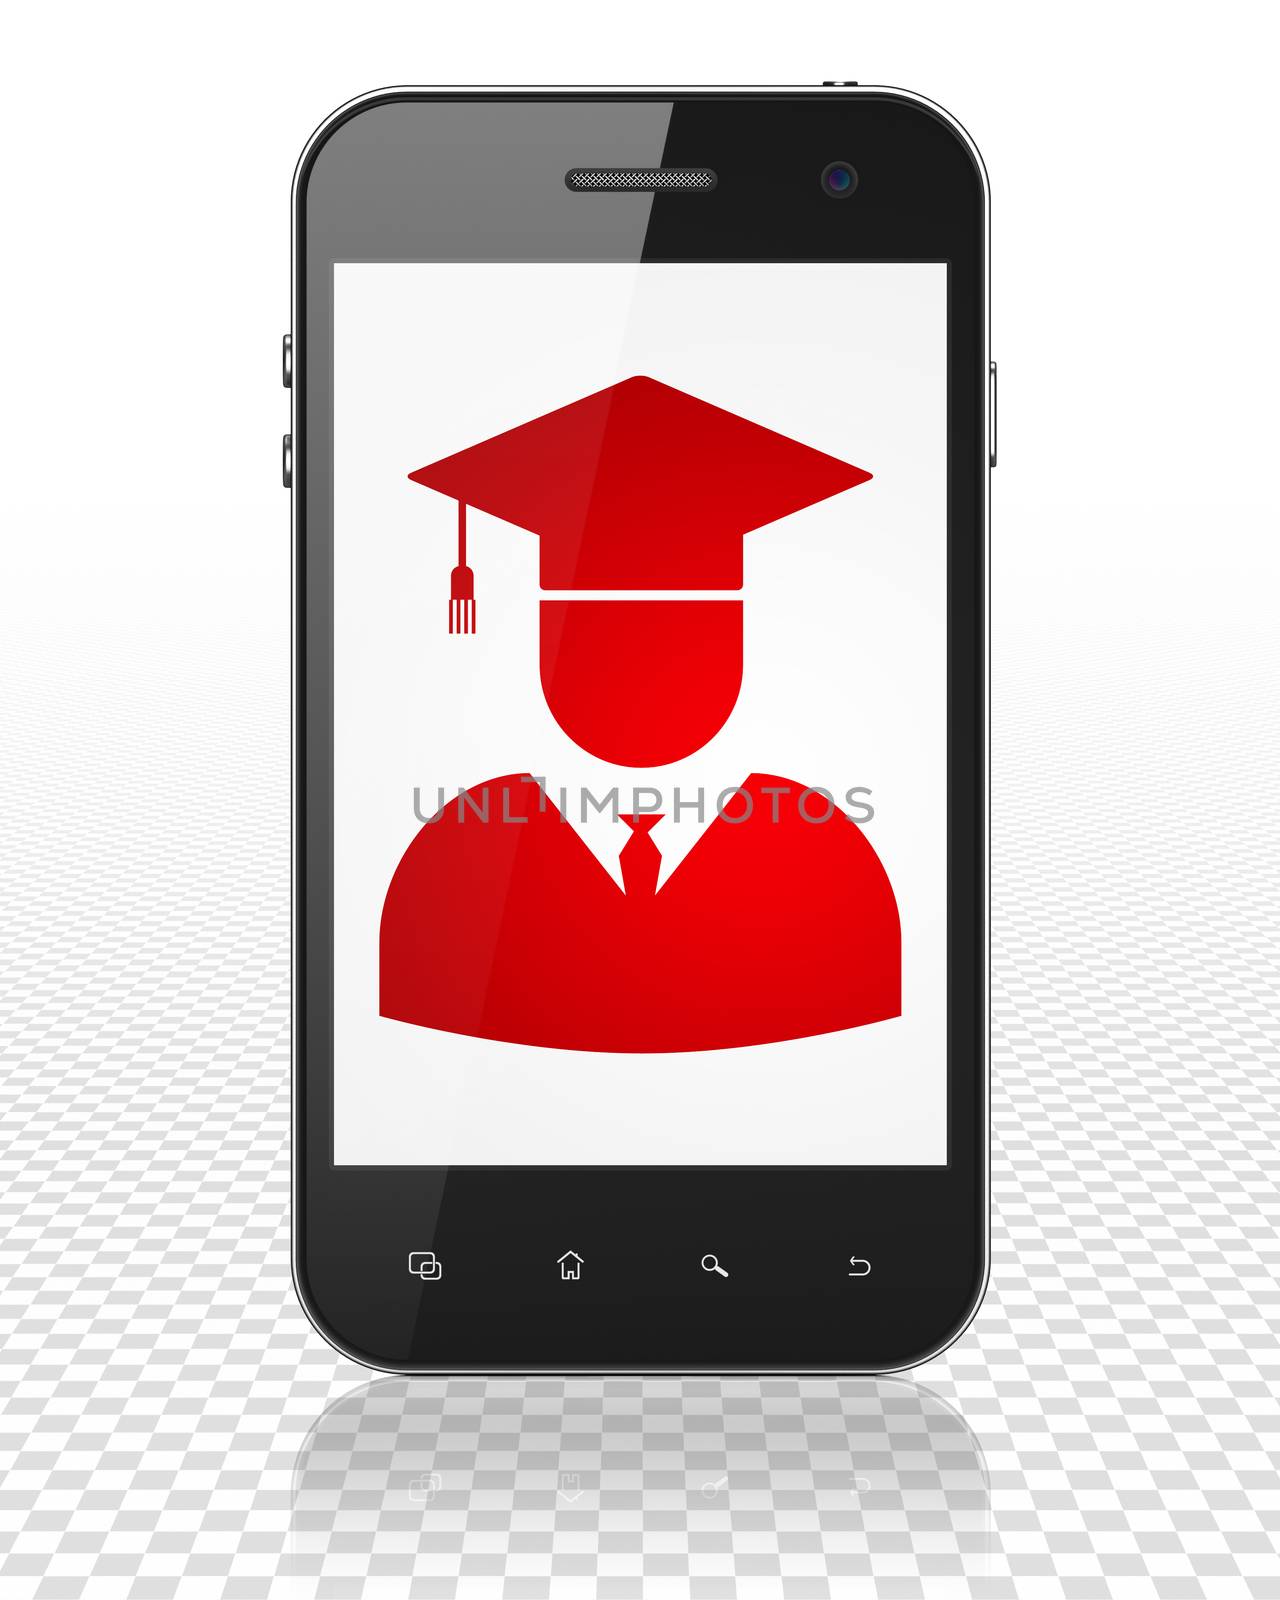 Learning concept: Smartphone with red Student icon on display